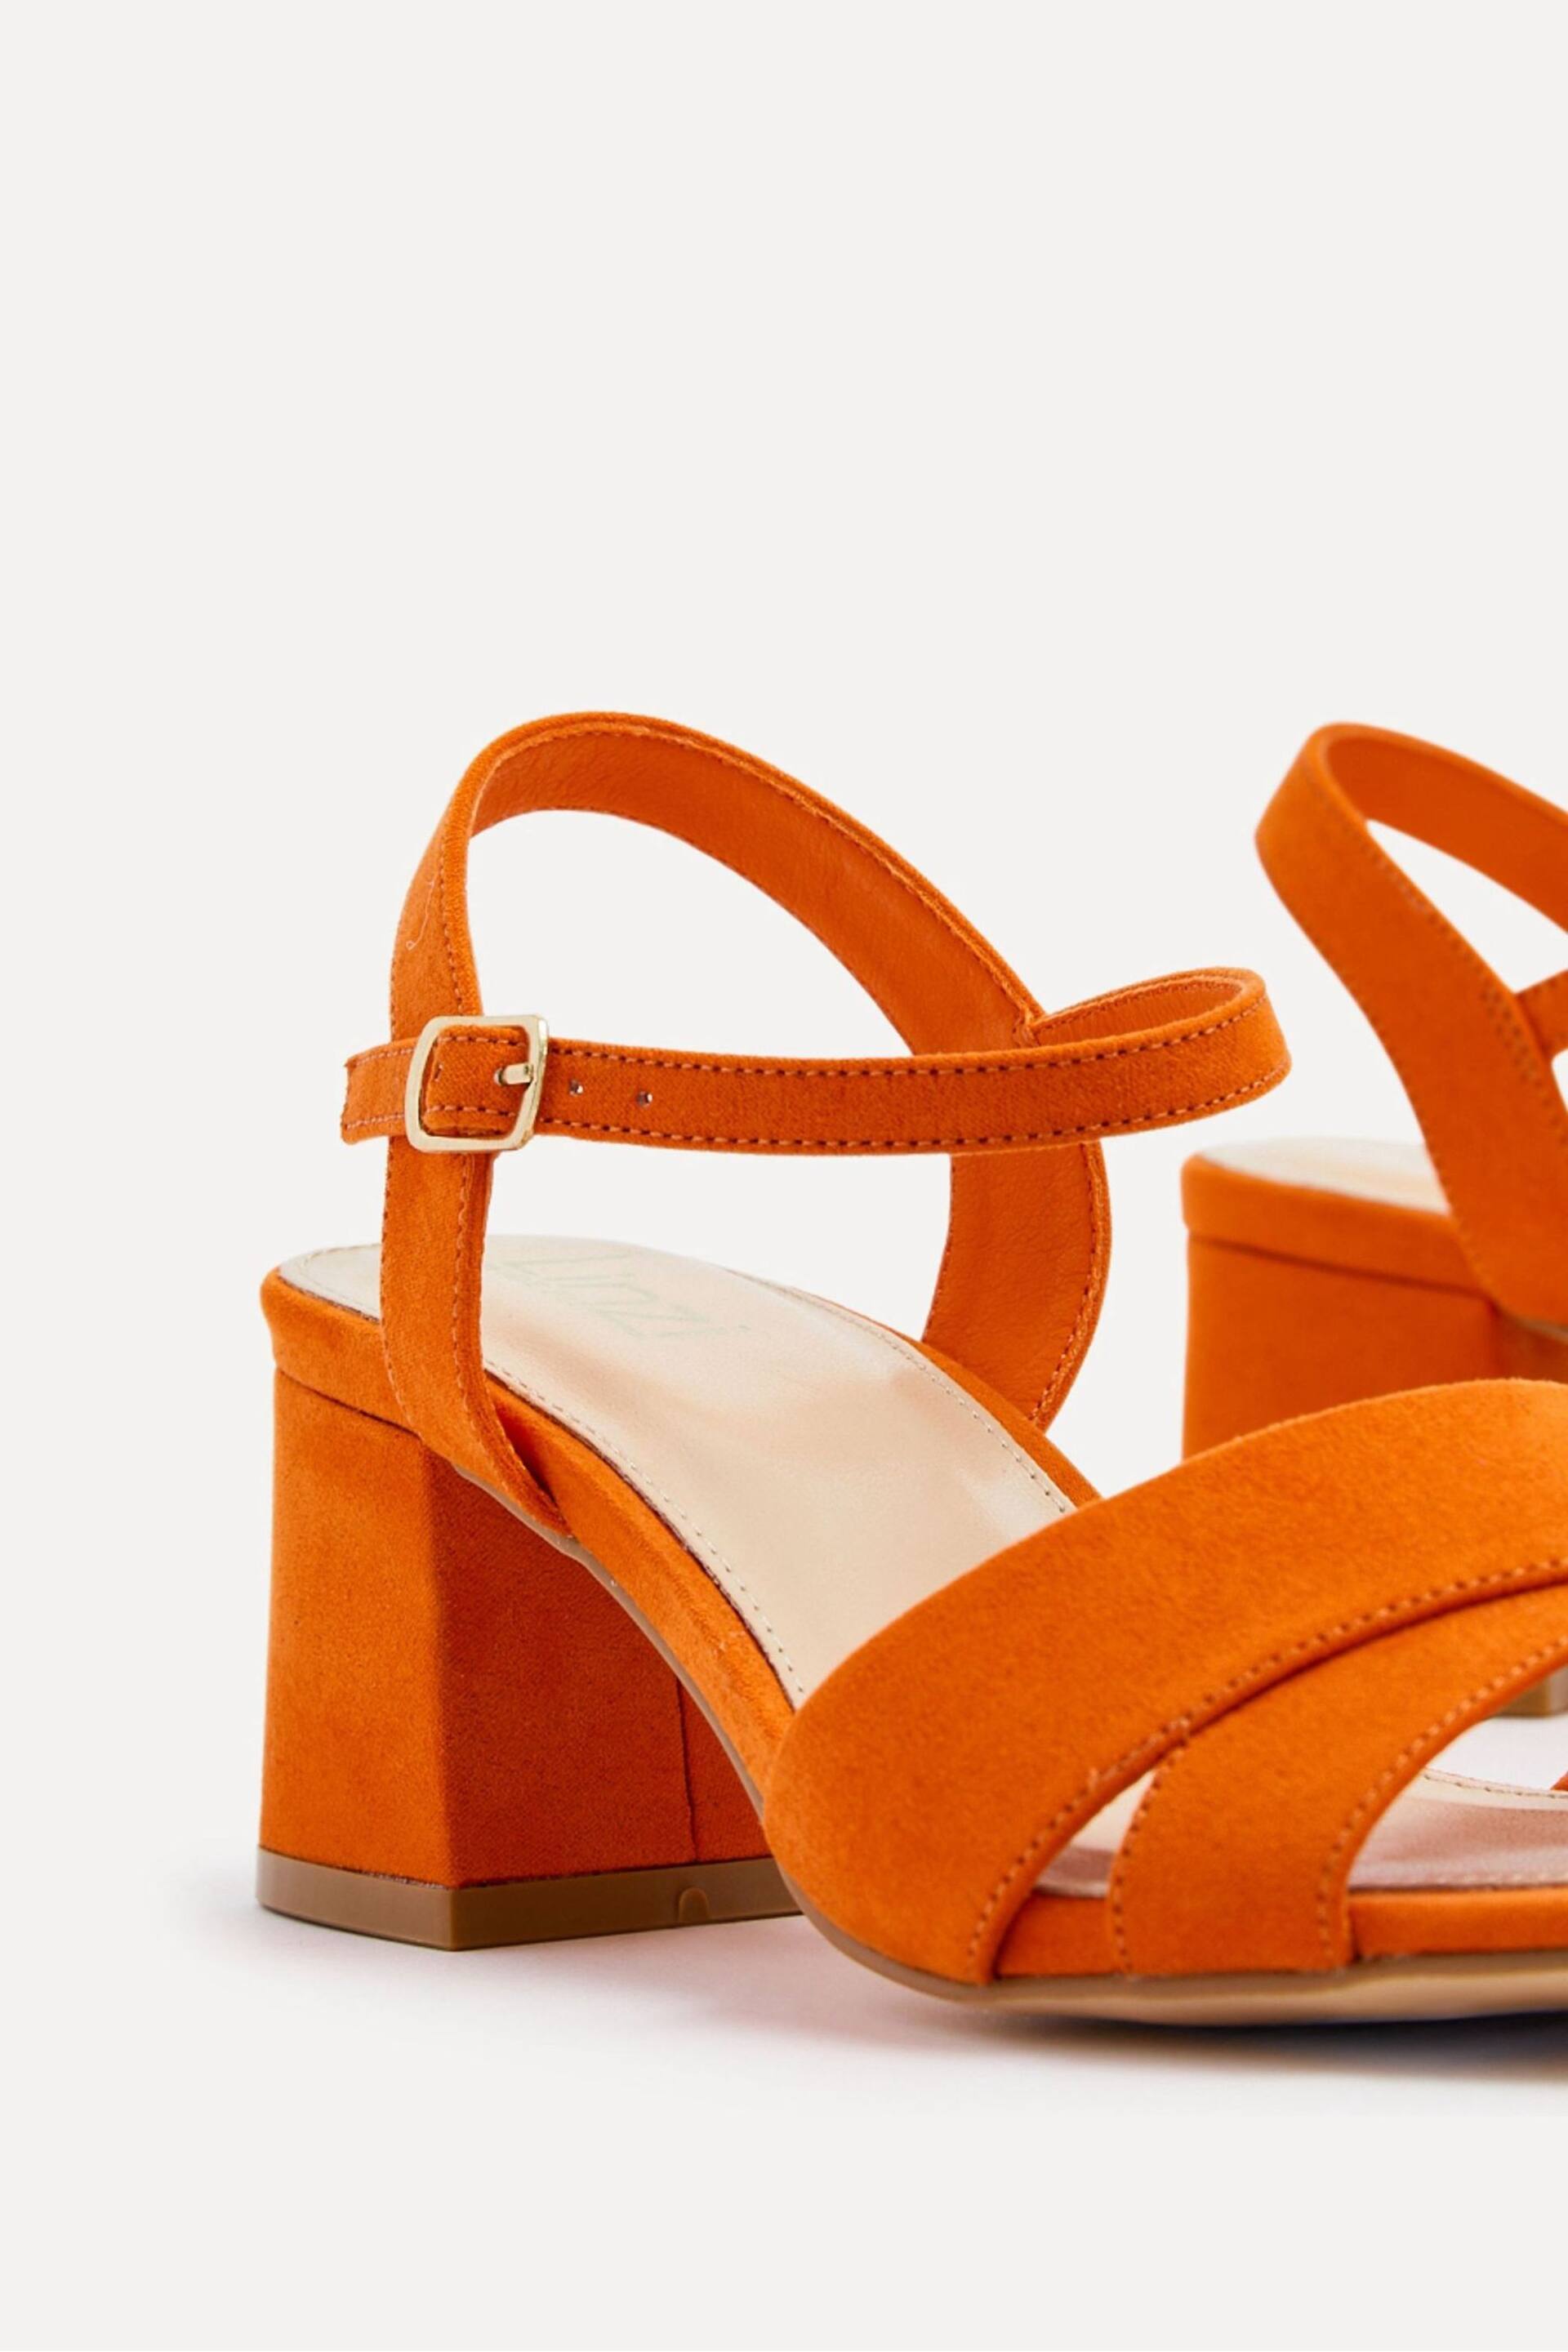 Linzi Orange Vivian Wide Fit Heeled Sandals With Crossover Front Strap - Image 5 of 5